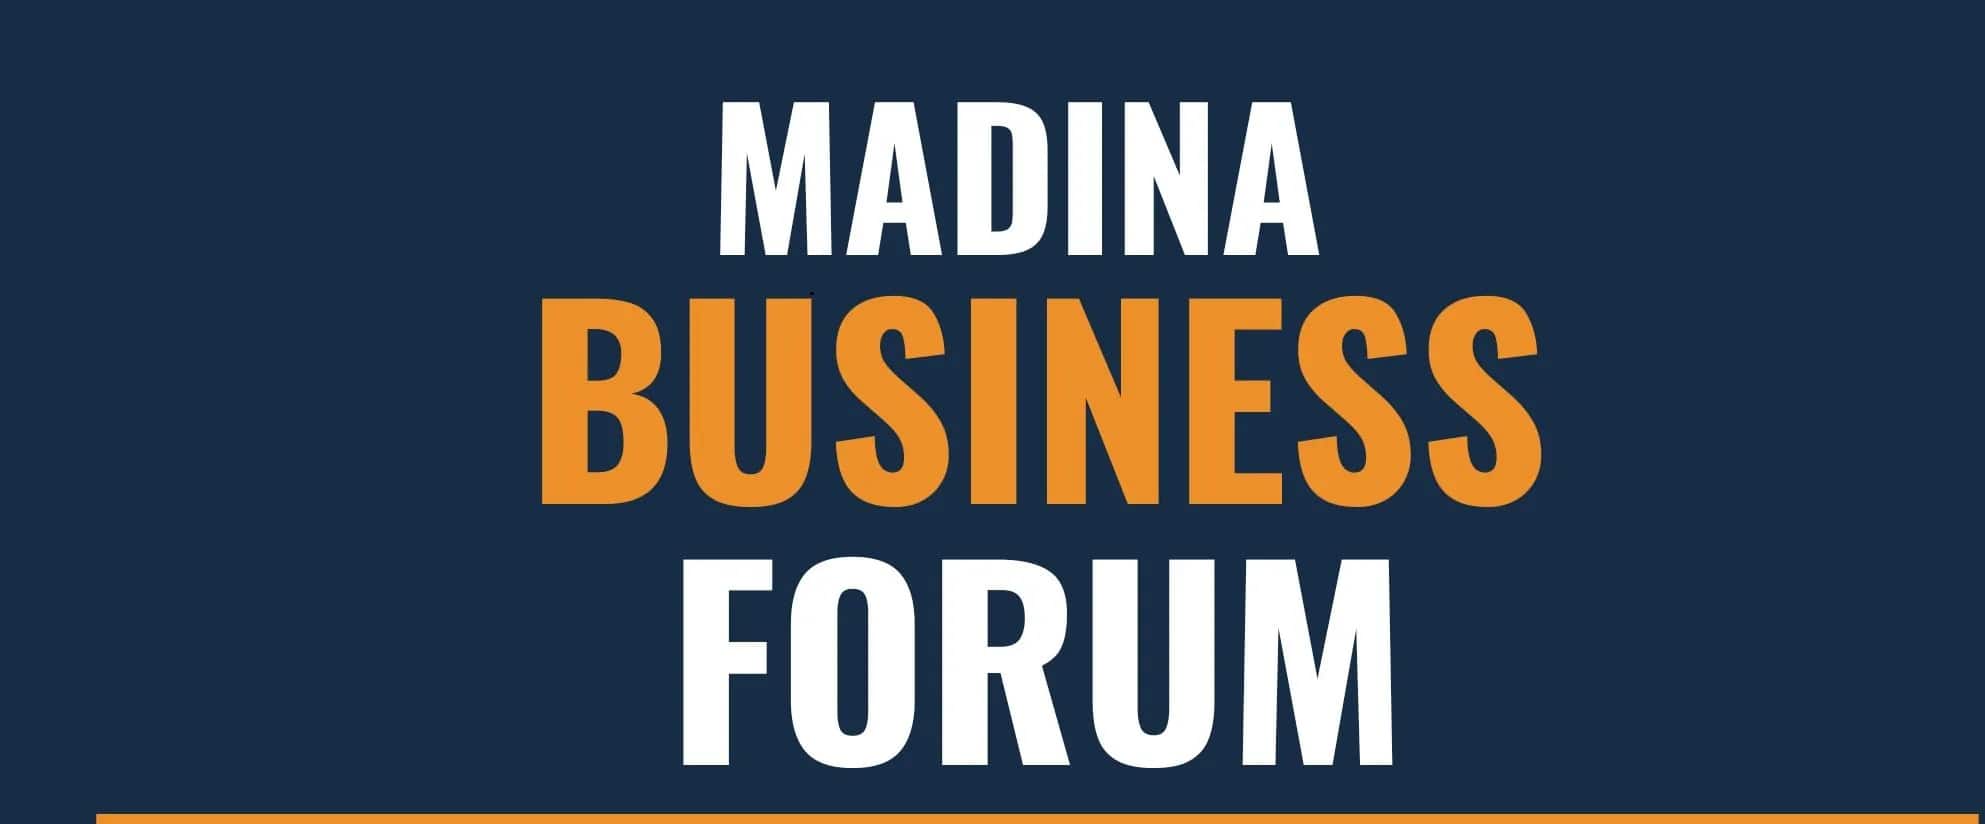 WHY THE MADINA BUSINESS FORUM WAS AUTHORIZED